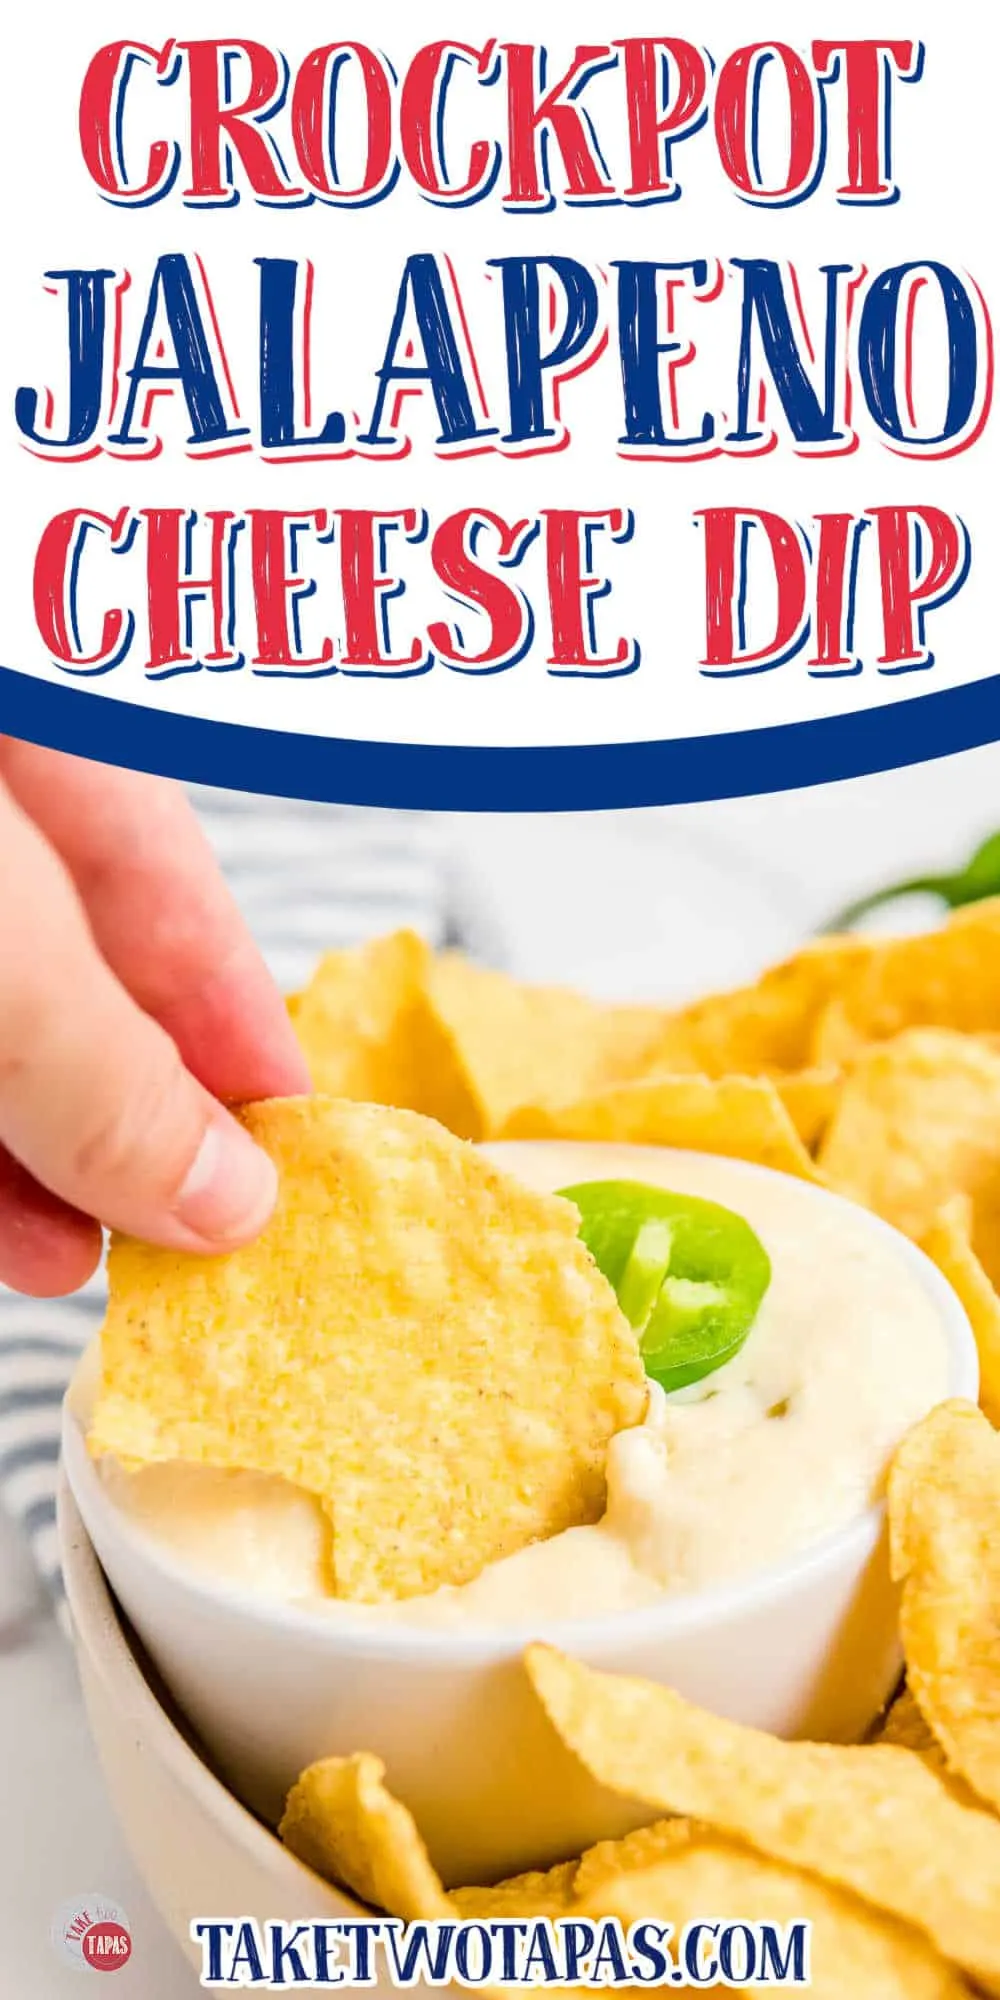 hand scooping cheese dip with text